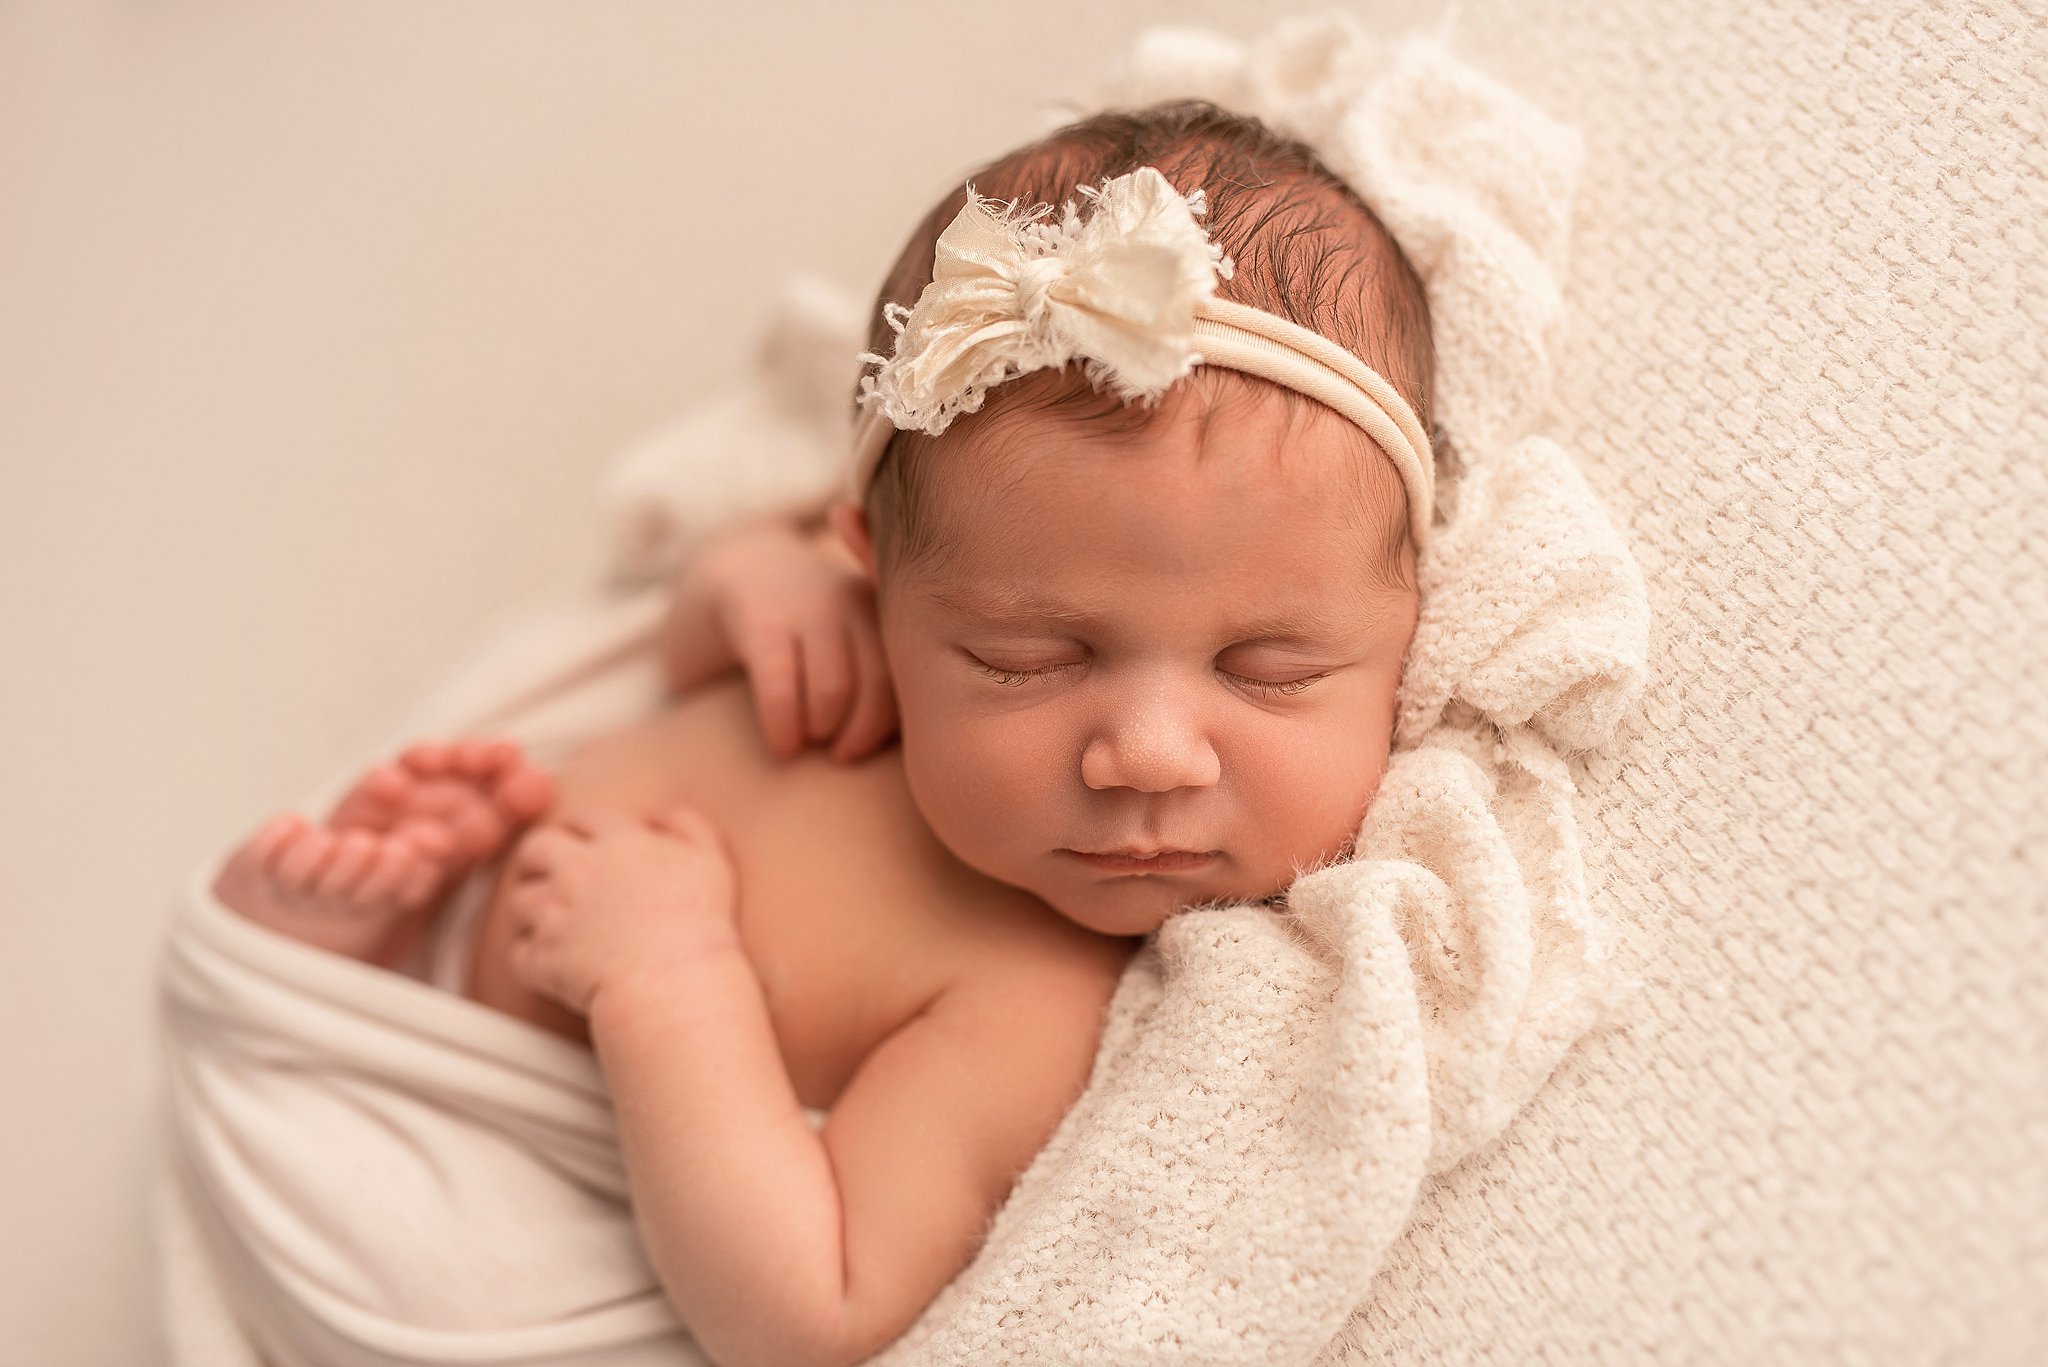 A newborn baby sleeps in a white blanket with a white headband and bow The nanny connection